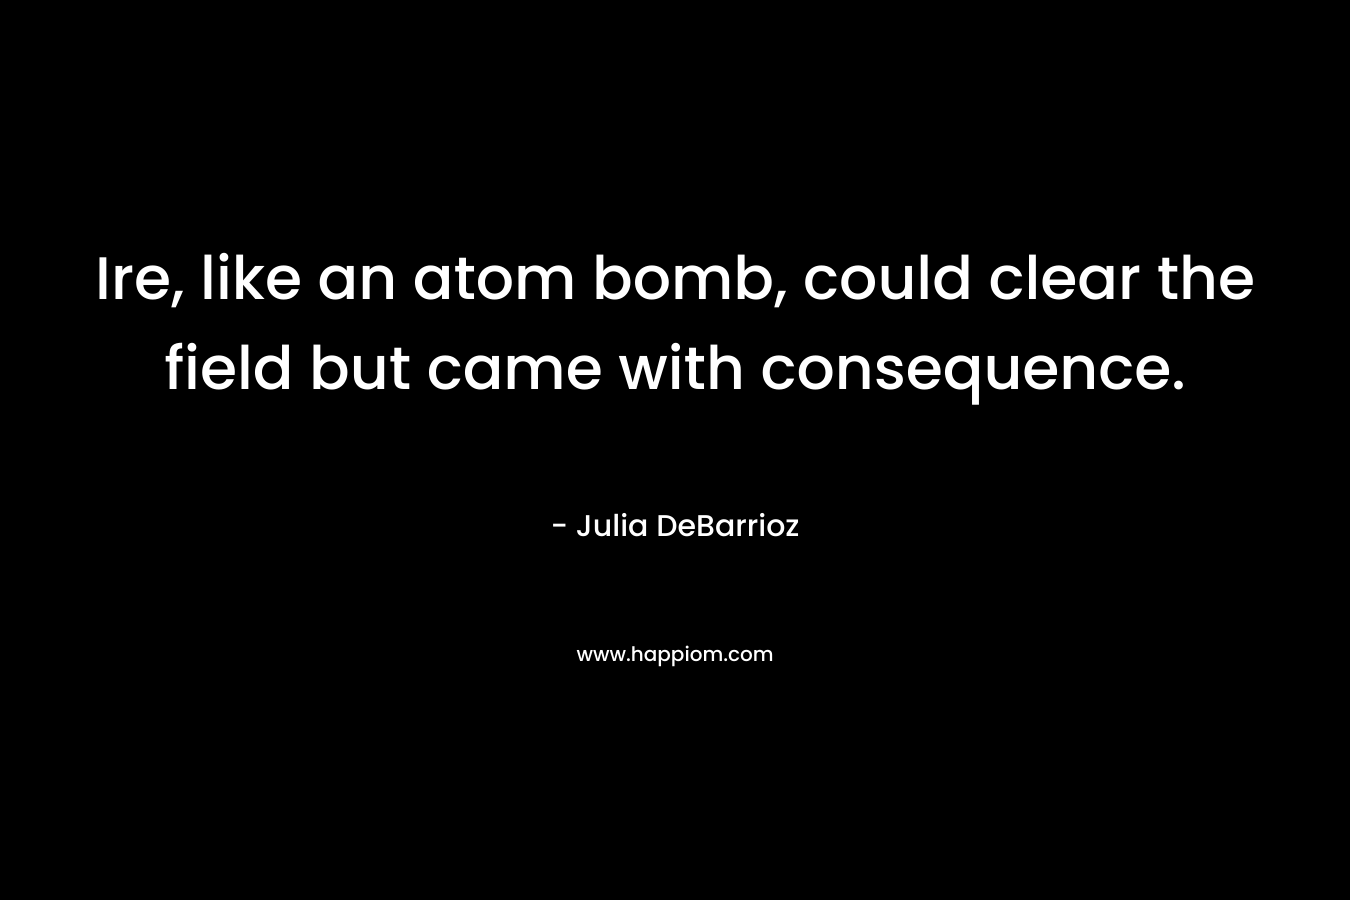 Ire, like an atom bomb, could clear the field but came with consequence. – Julia DeBarrioz